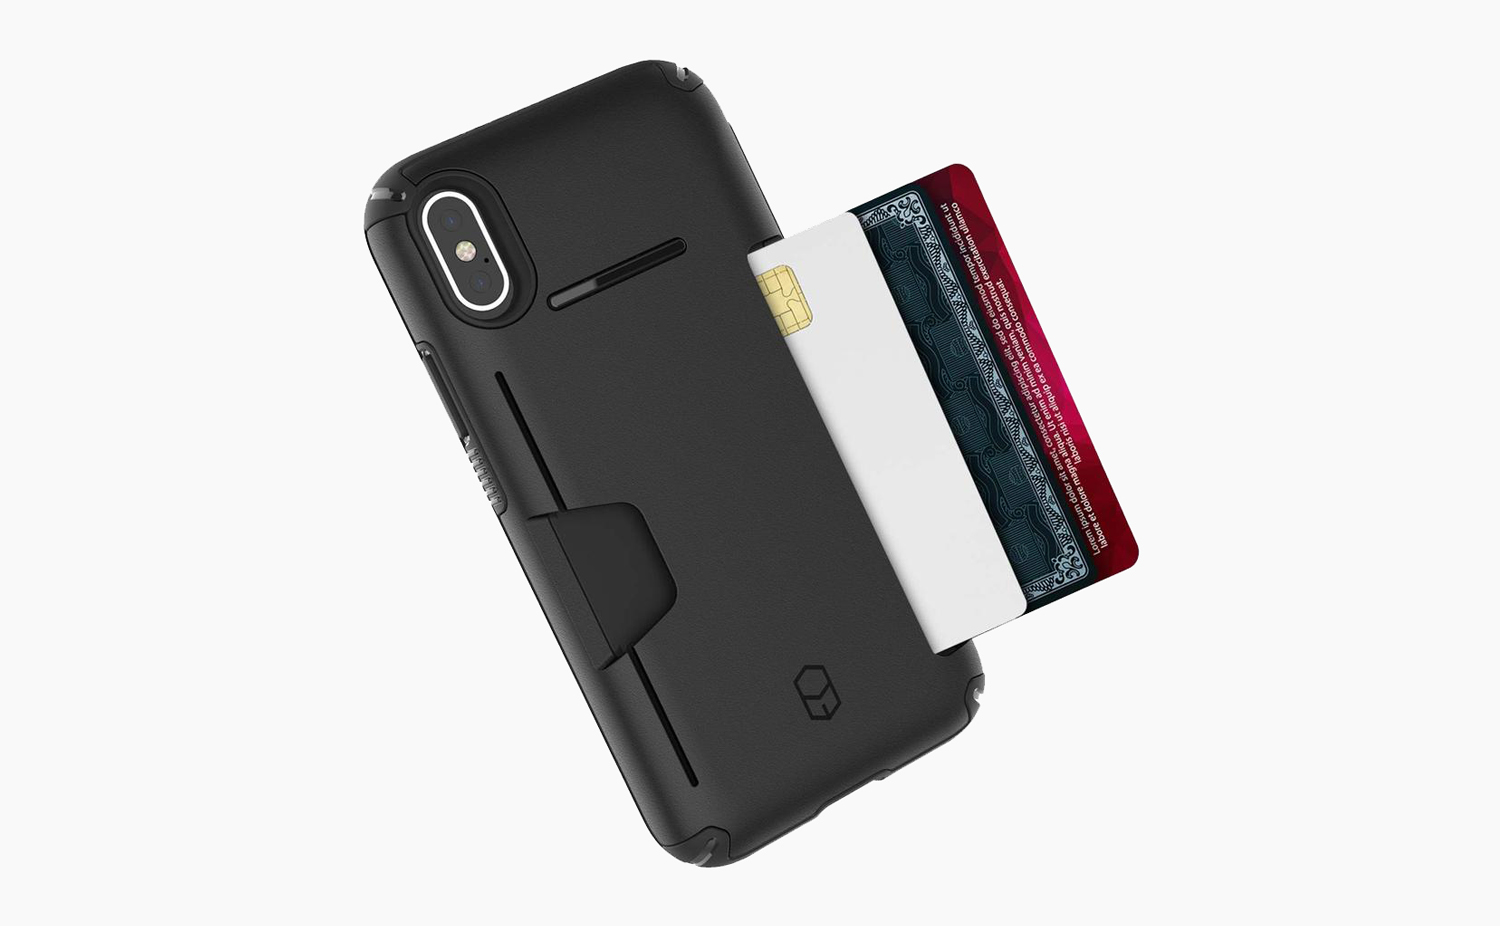 Level Wallet Case for iPhone: Main image